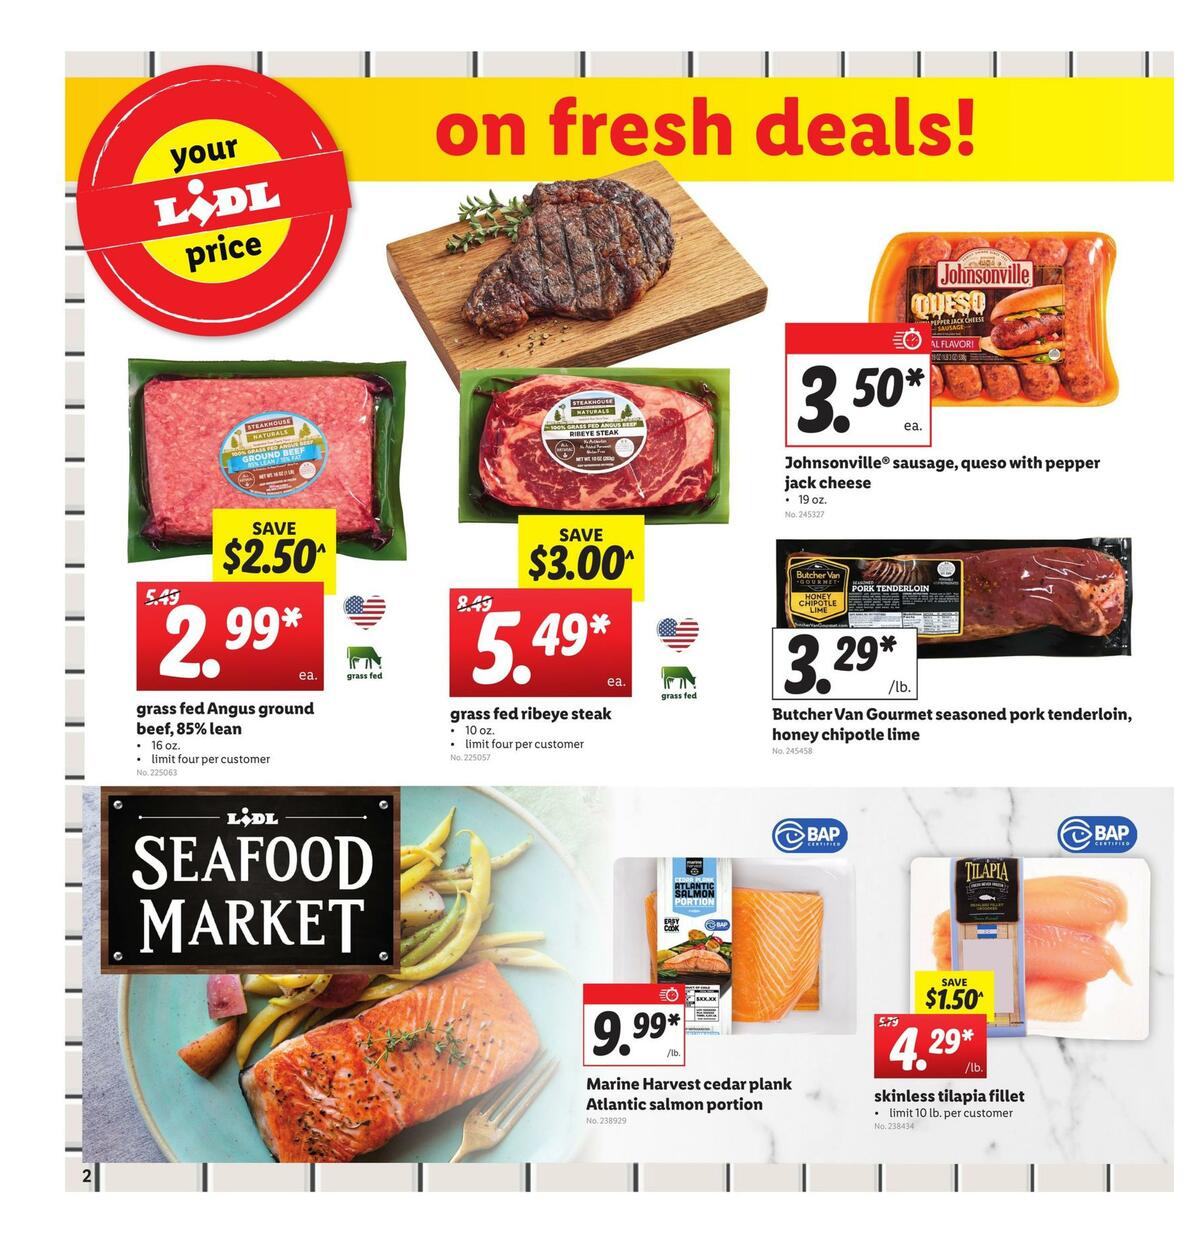 LIDL Weekly Ad from April 29